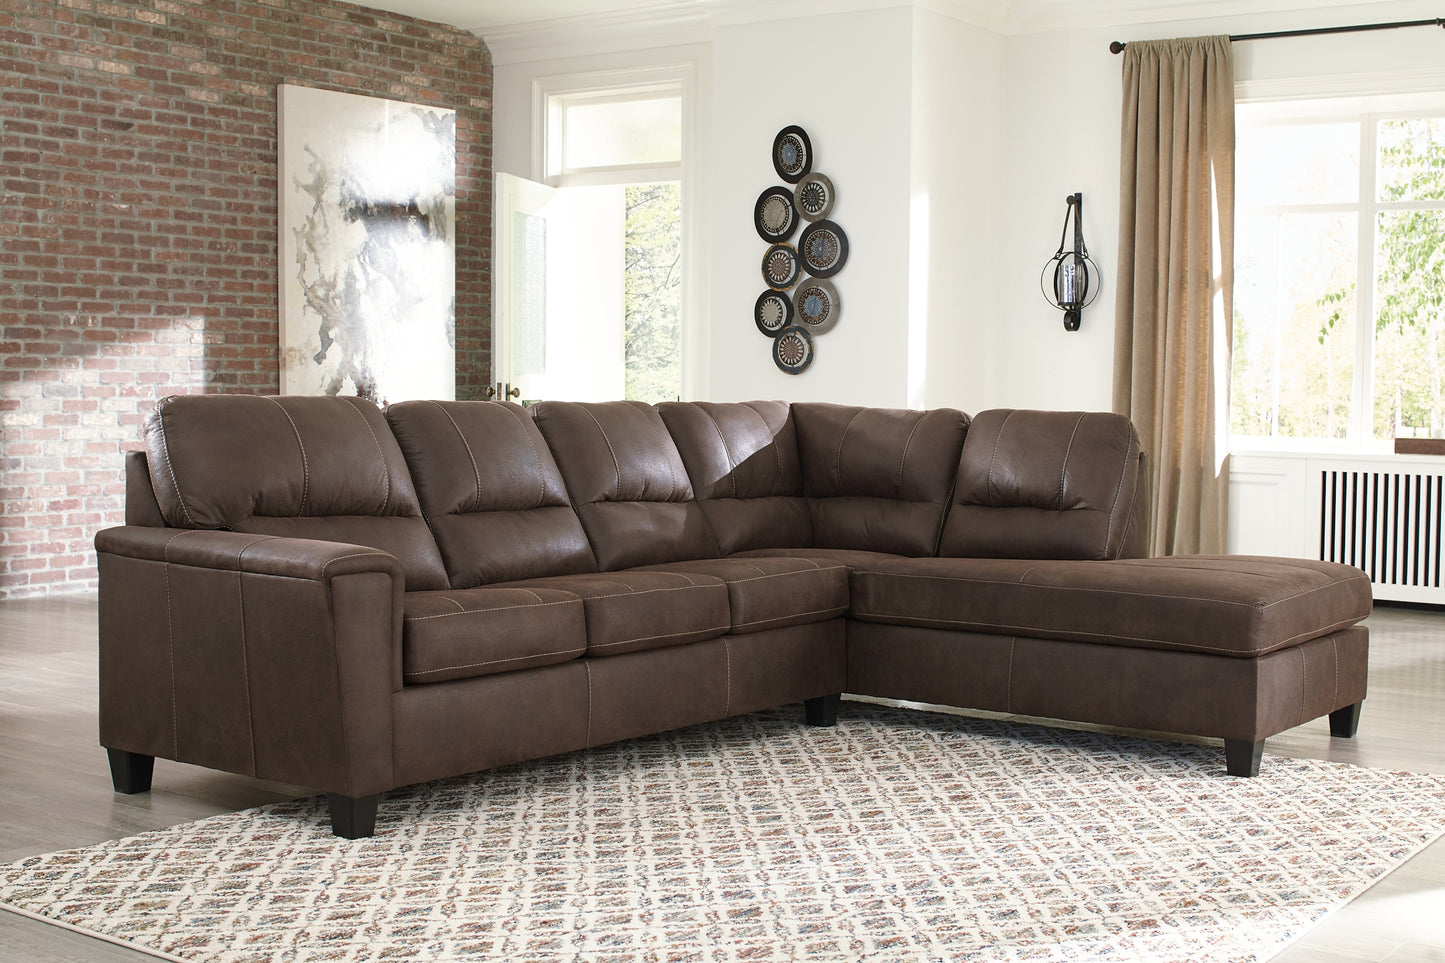 Navi 2-Piece Sleeper Sectional with Chaise